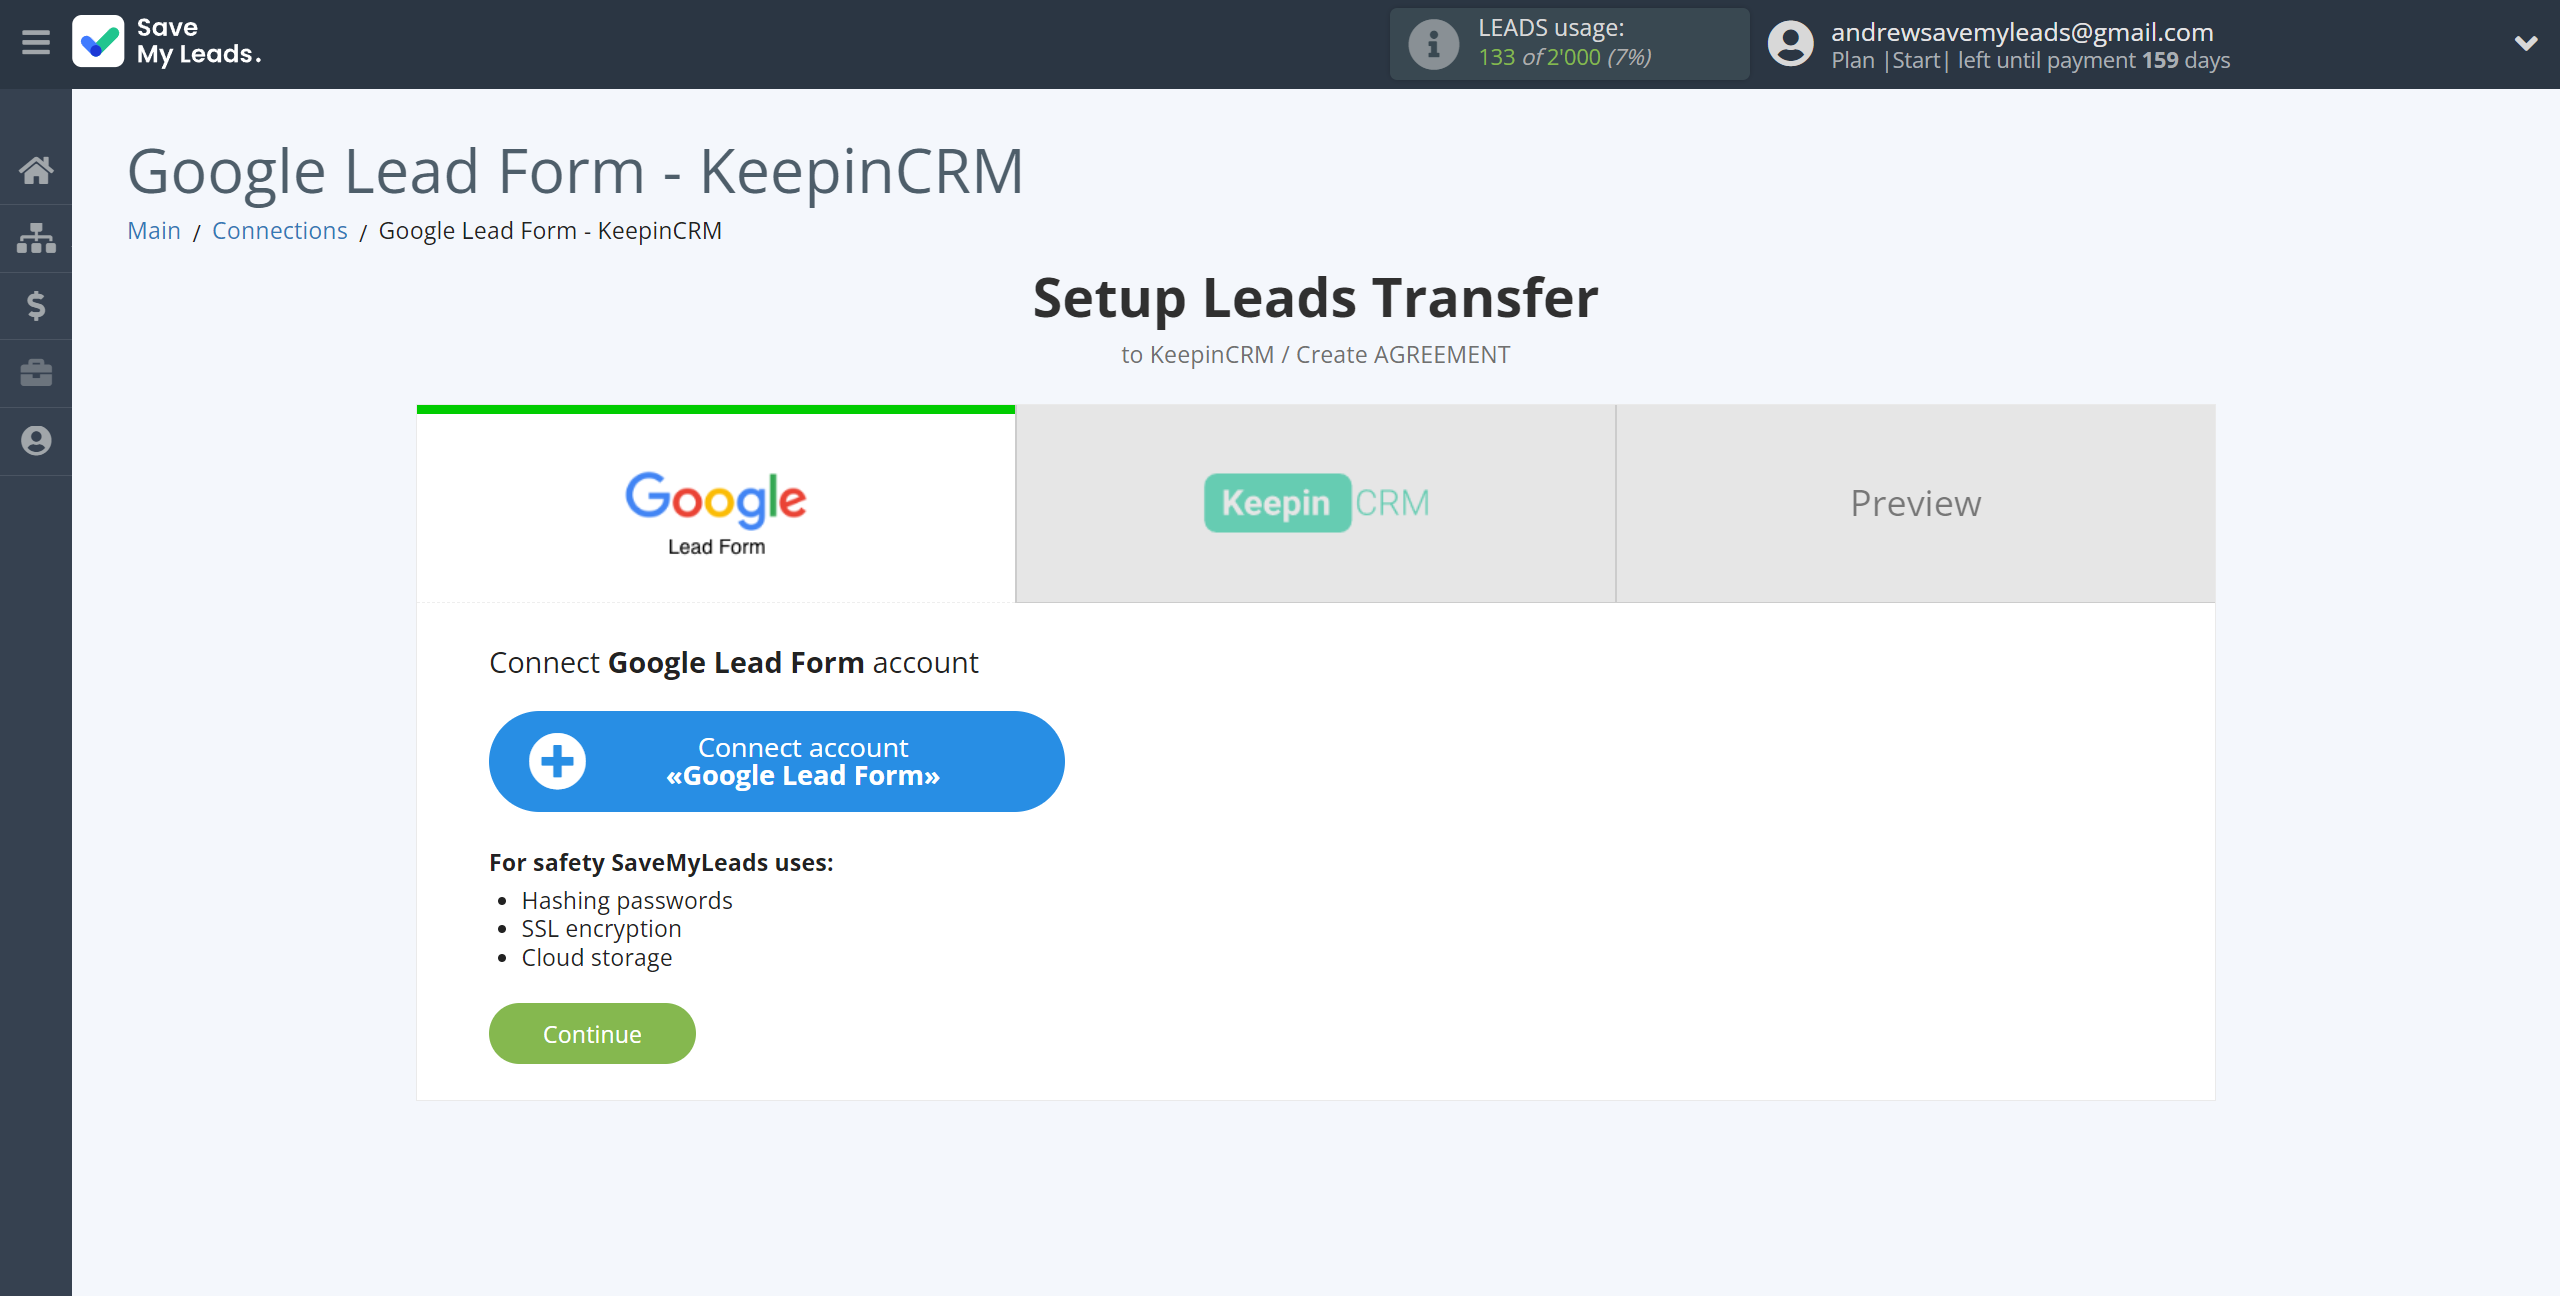 How to Connect Google Lead Form with KeepinCRM Create Agreement | Data Source account connection